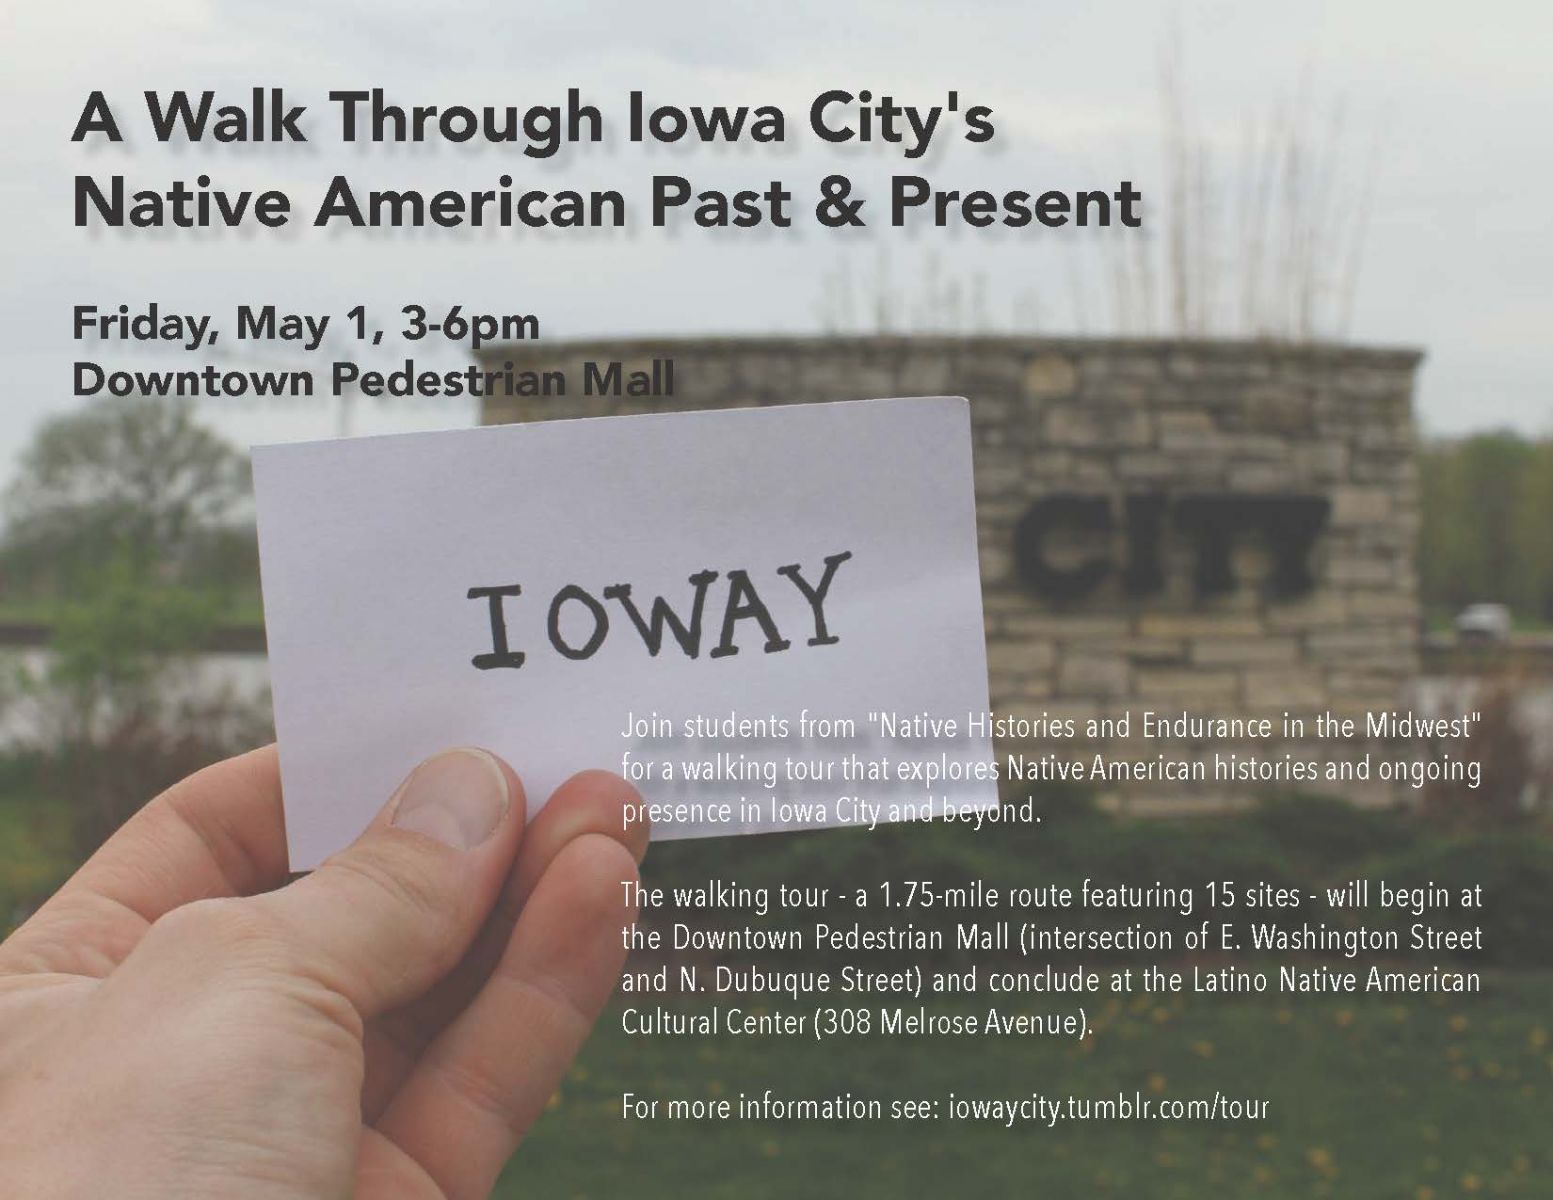 Flyer for walking tour of Iowa City's Native American past